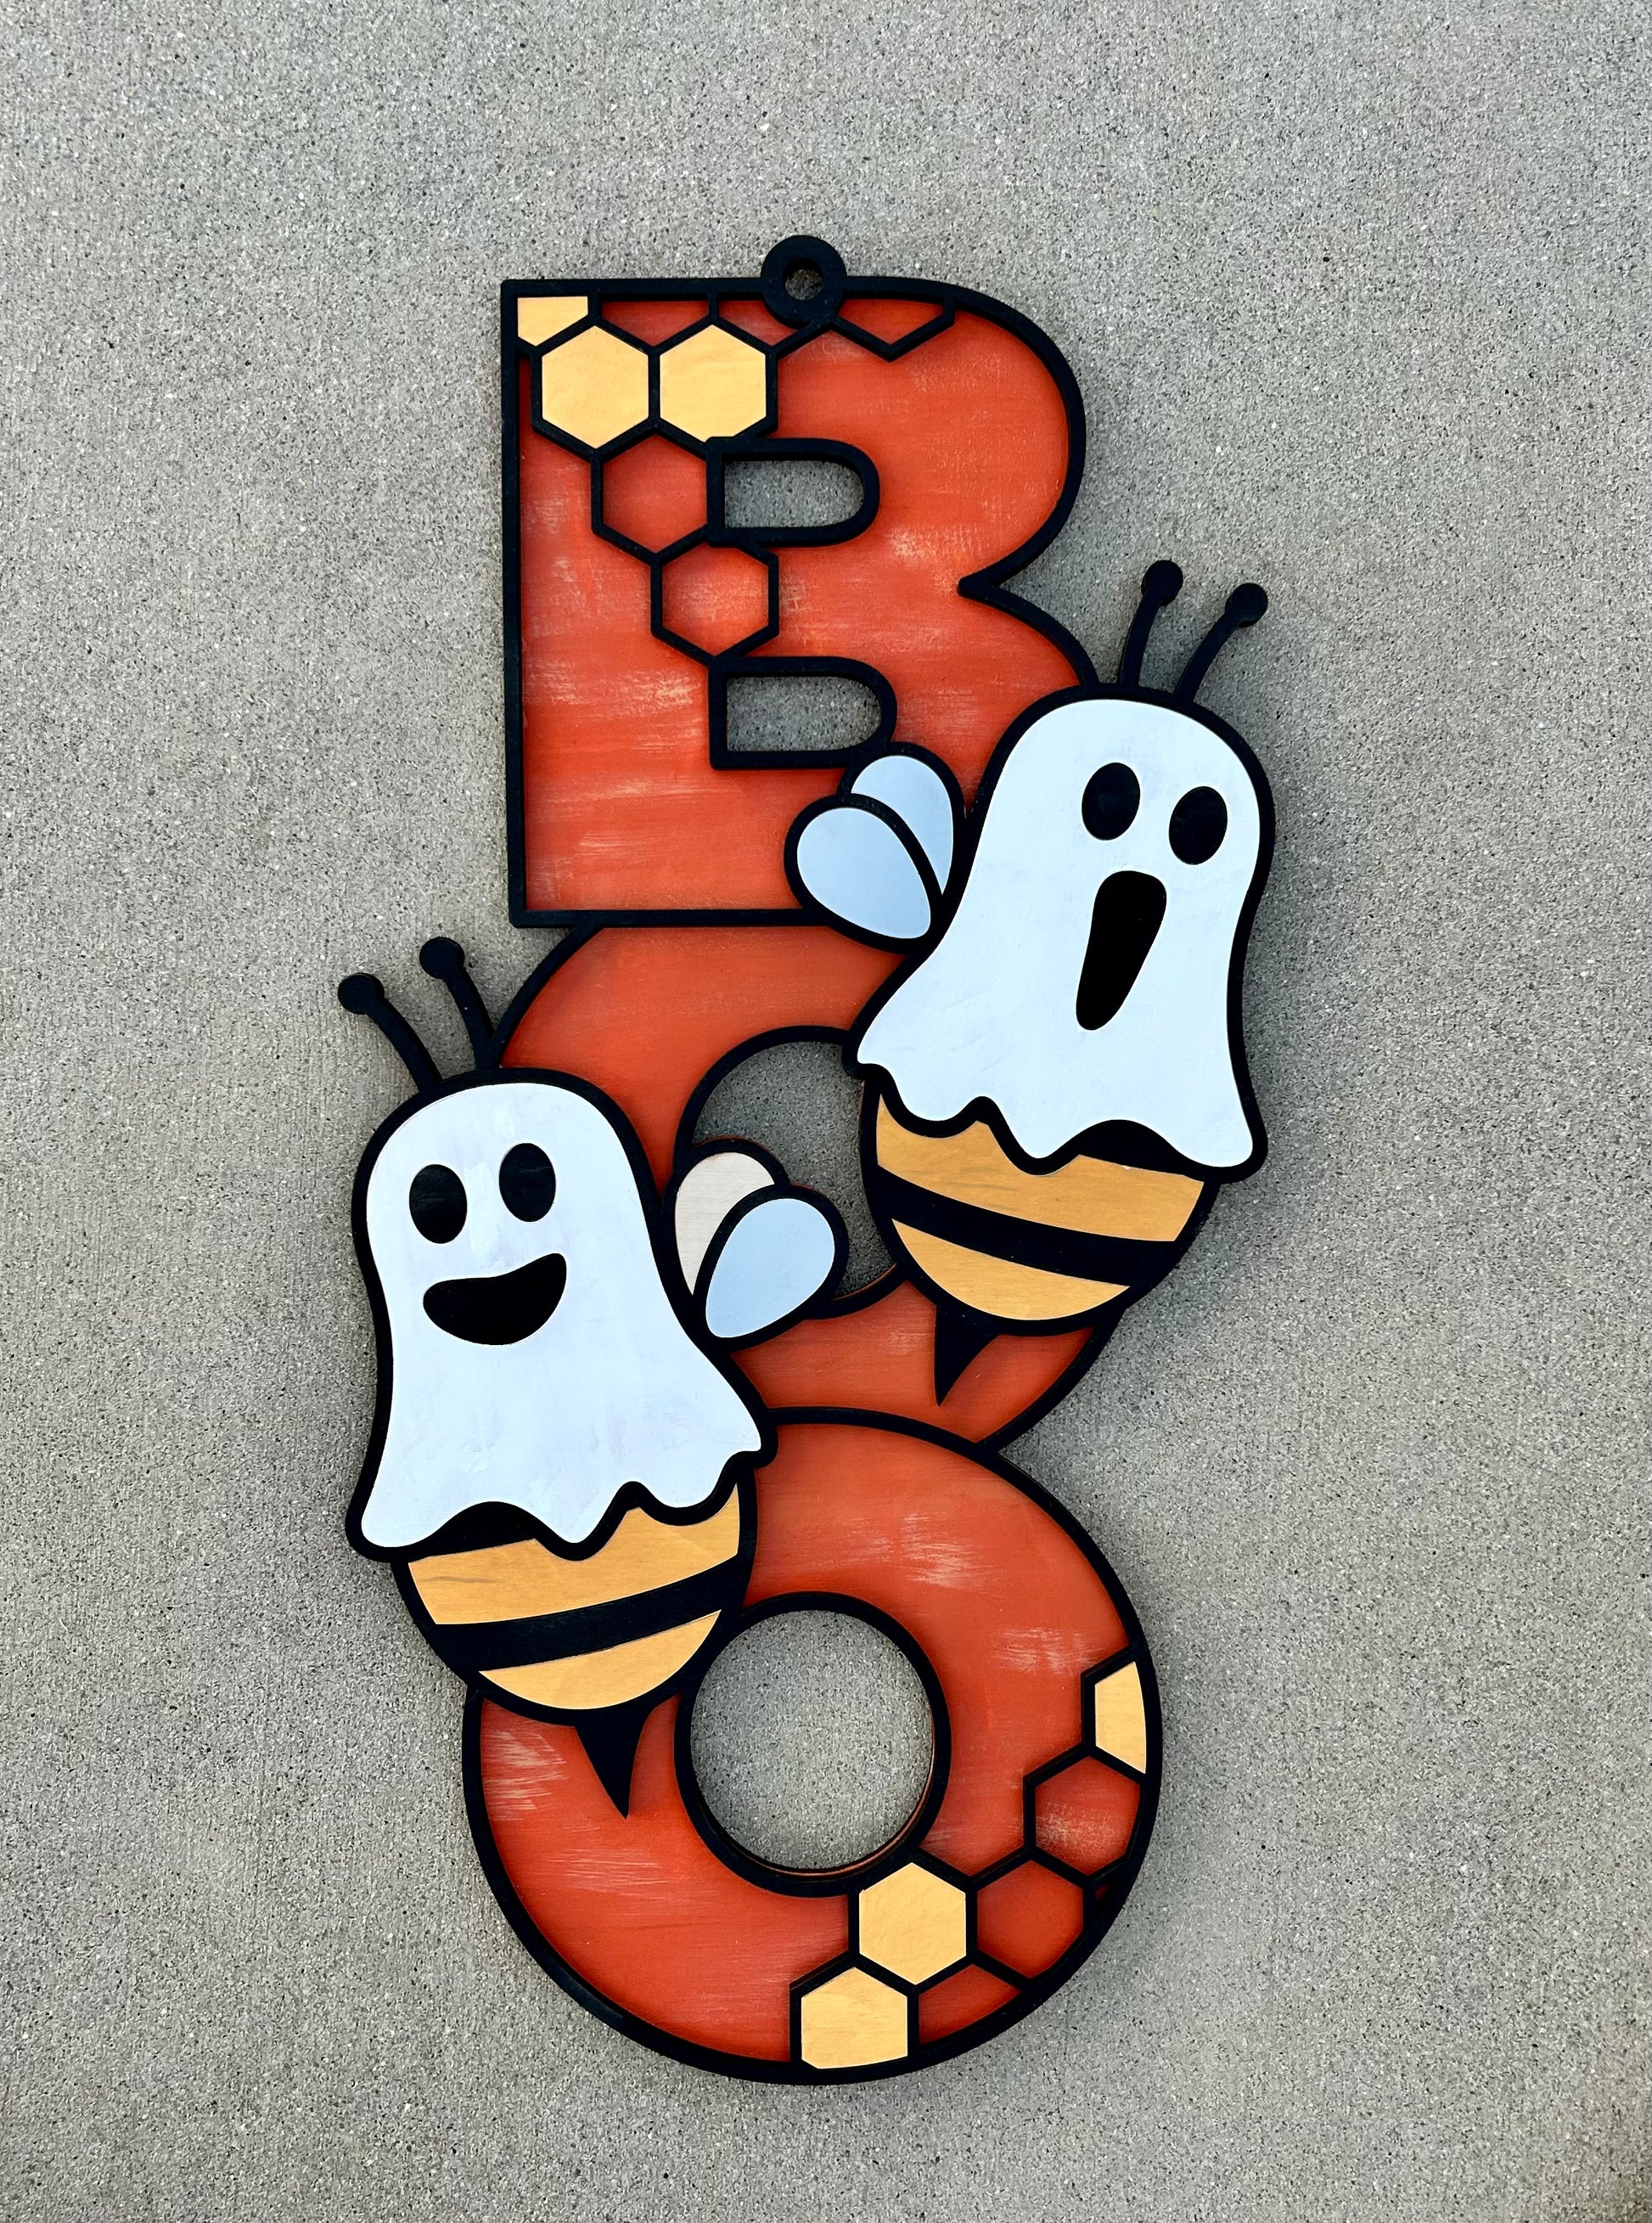 "Boo" ghosts sign